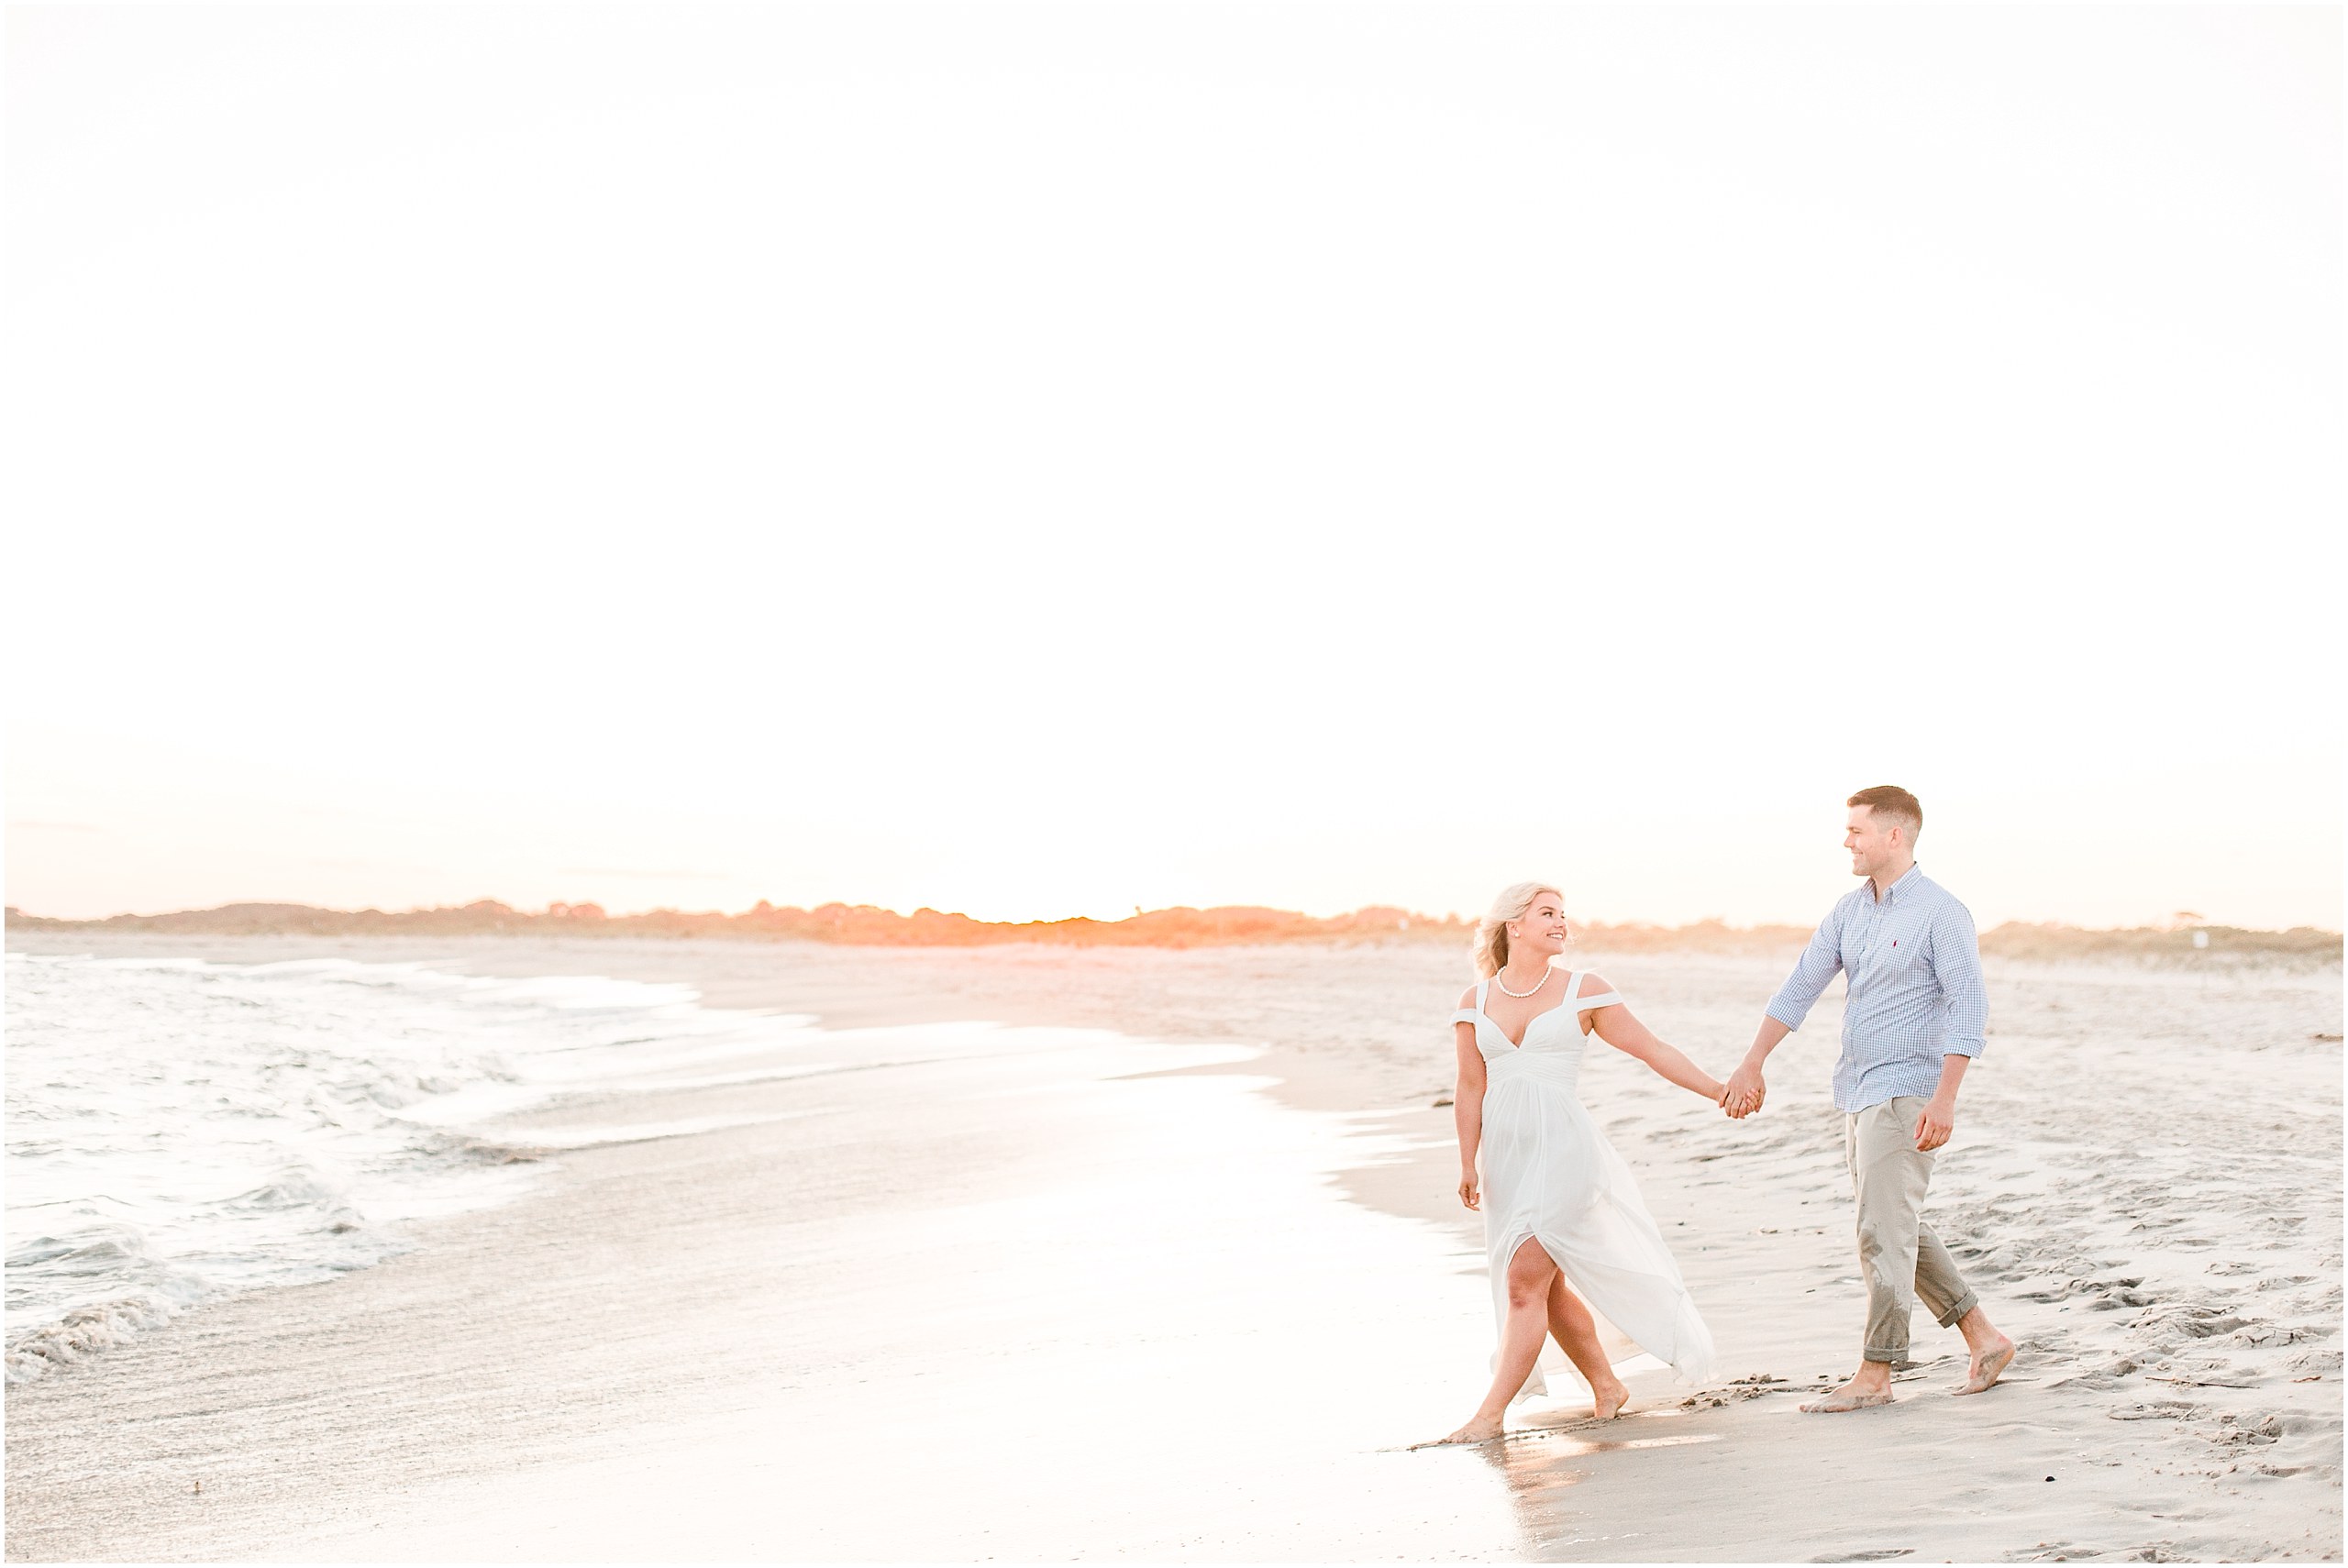 Jim And Alyssa's Summertime Engagement Session in Cape May NJ Photos